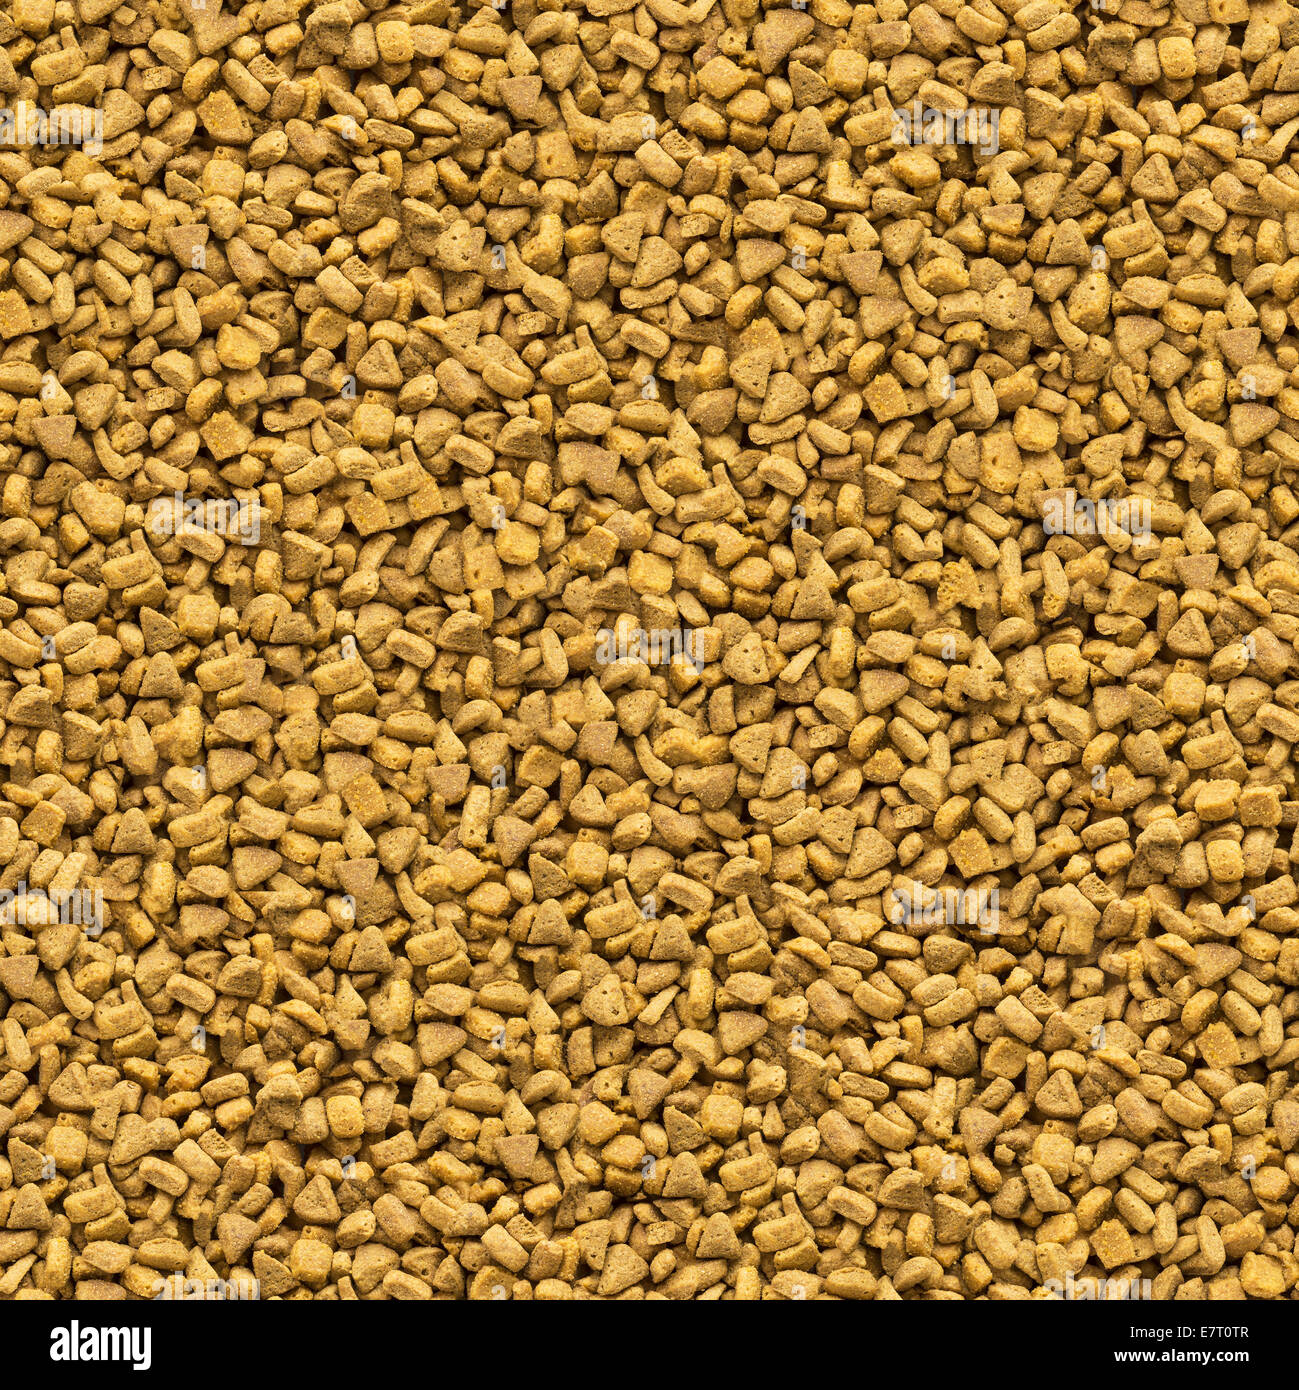 Cat and Dog Dry Food. Stock Photo